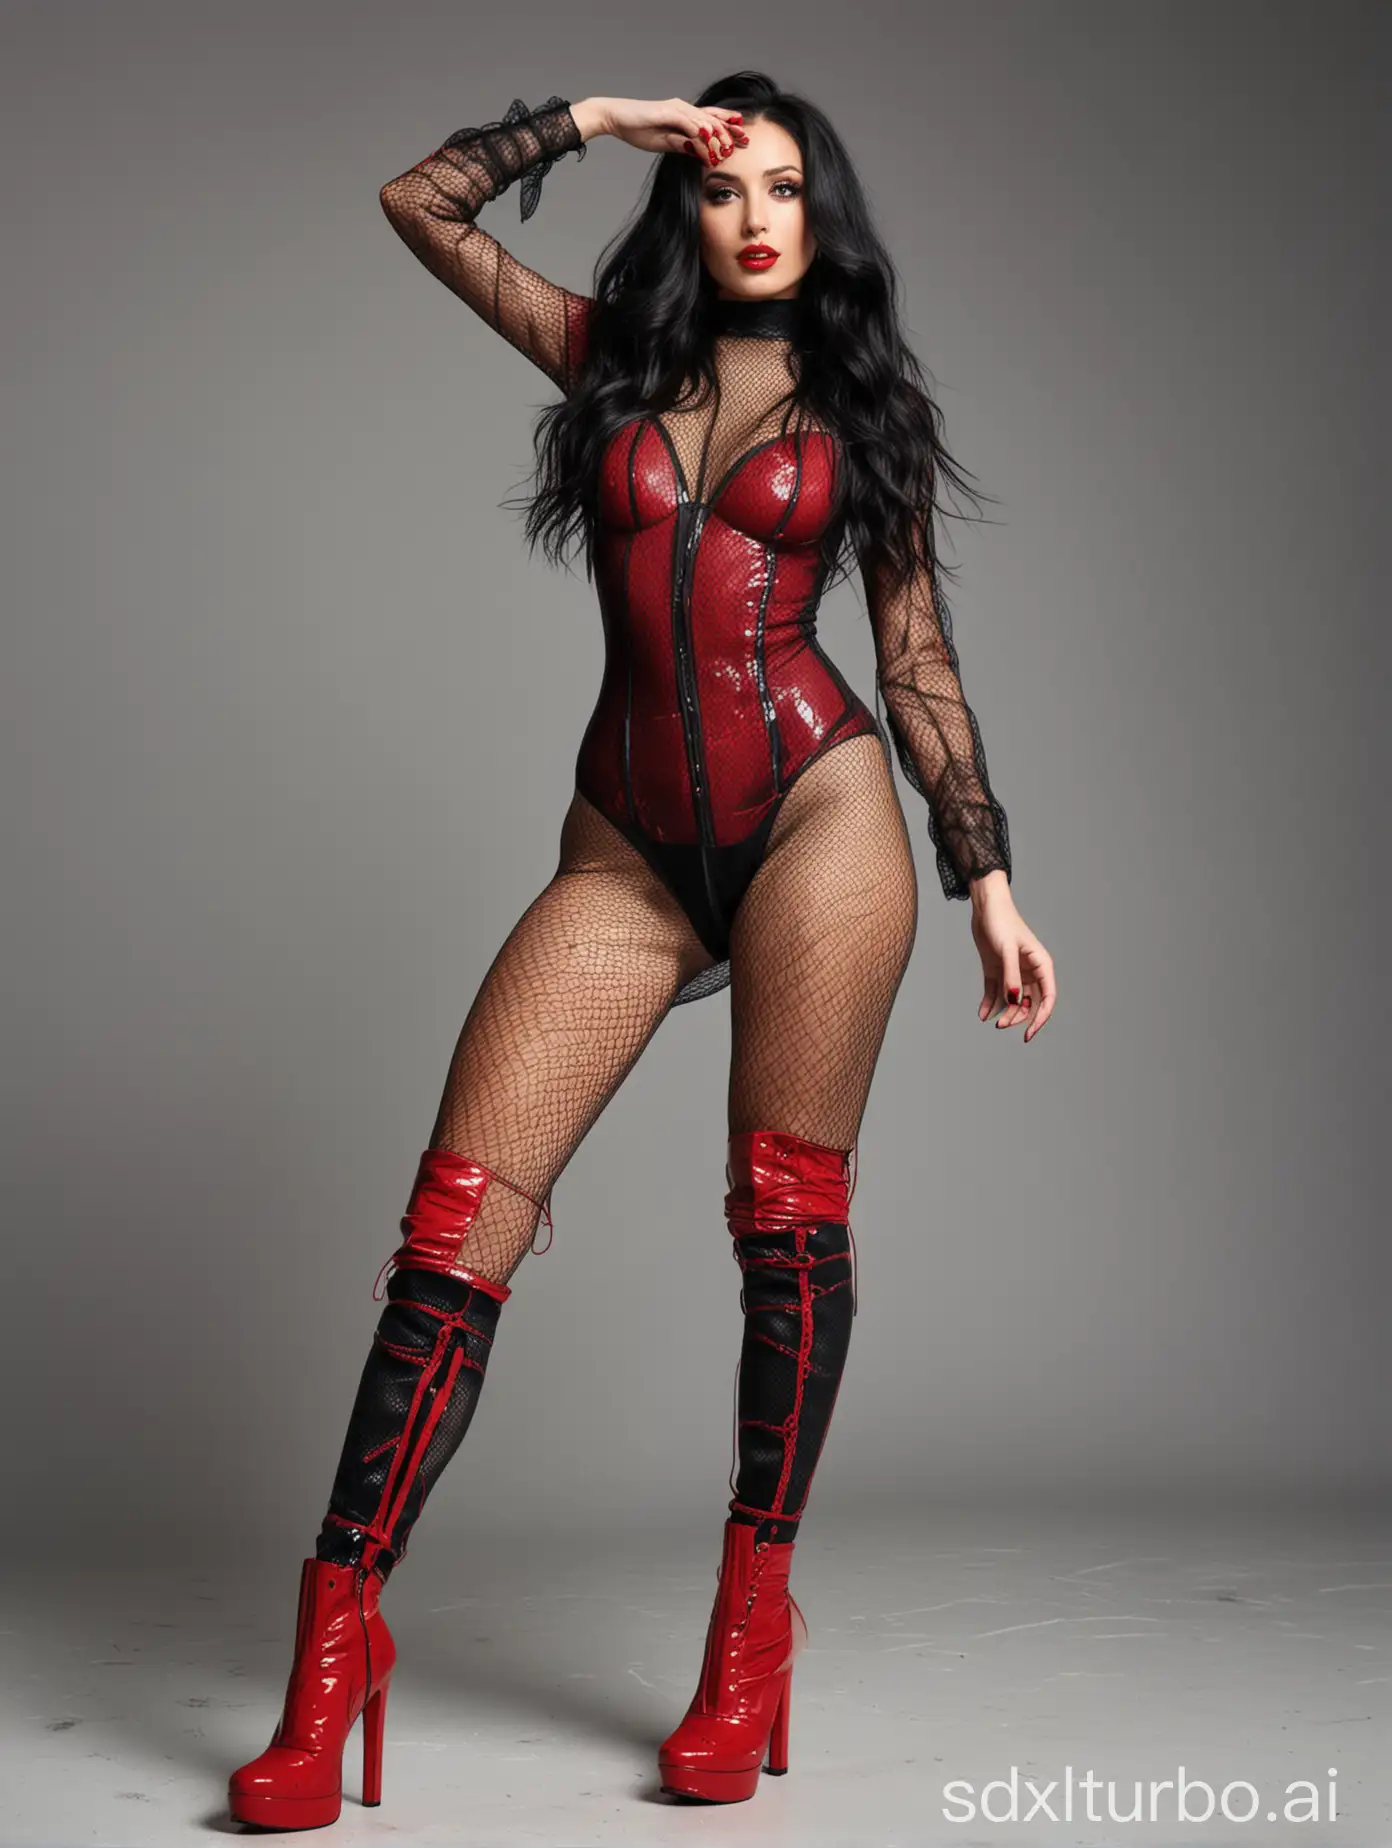 sexy woman with long black waving hair wearing red high-heeled boots, dressed in a black fishnet bodysuit